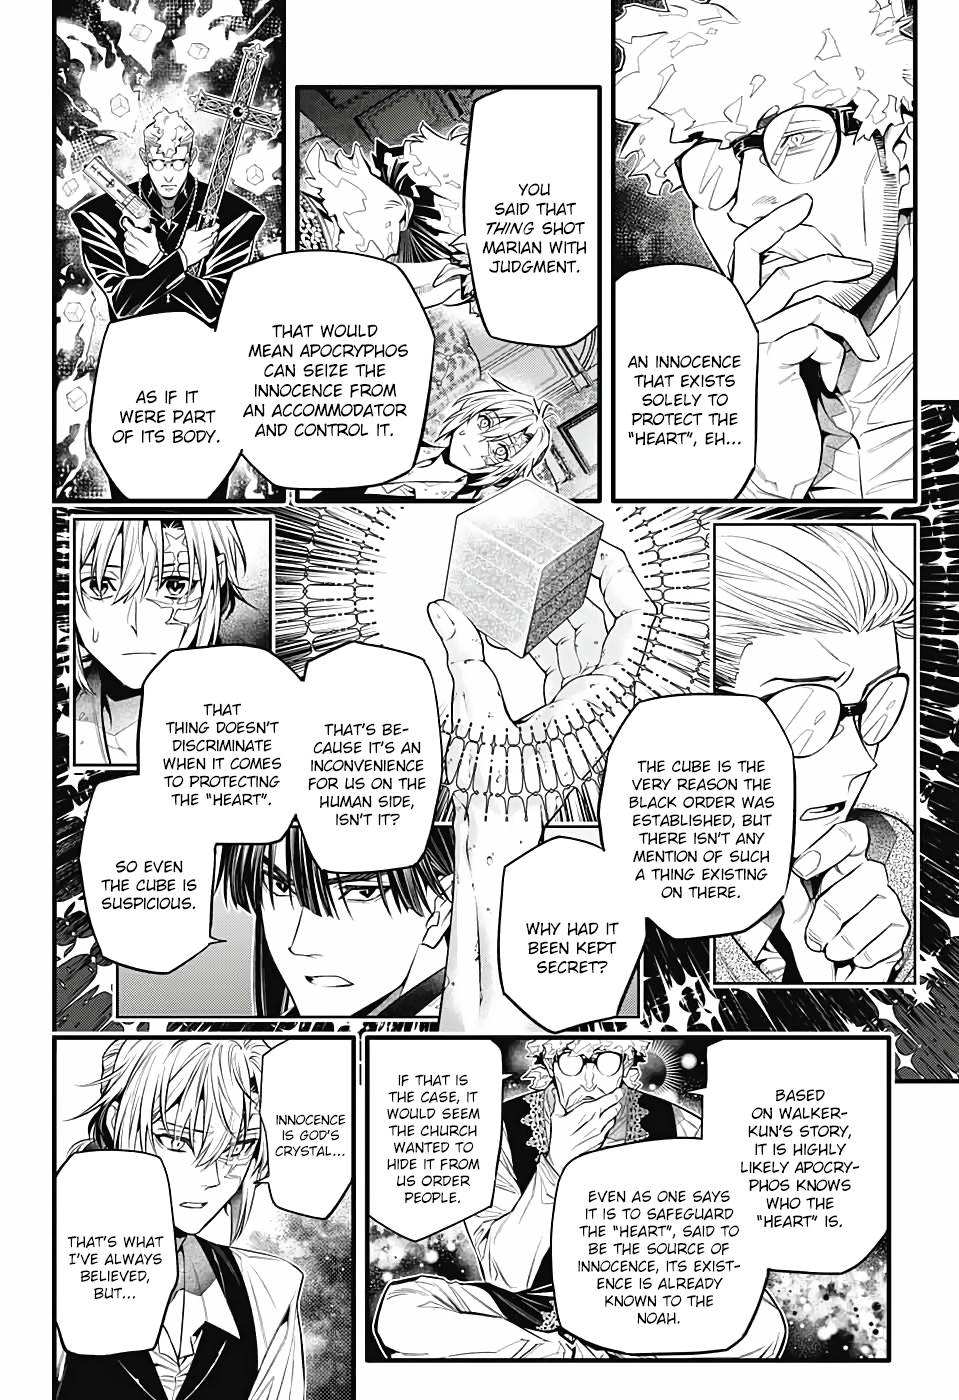 D.Gray-man chapter 247 page 27